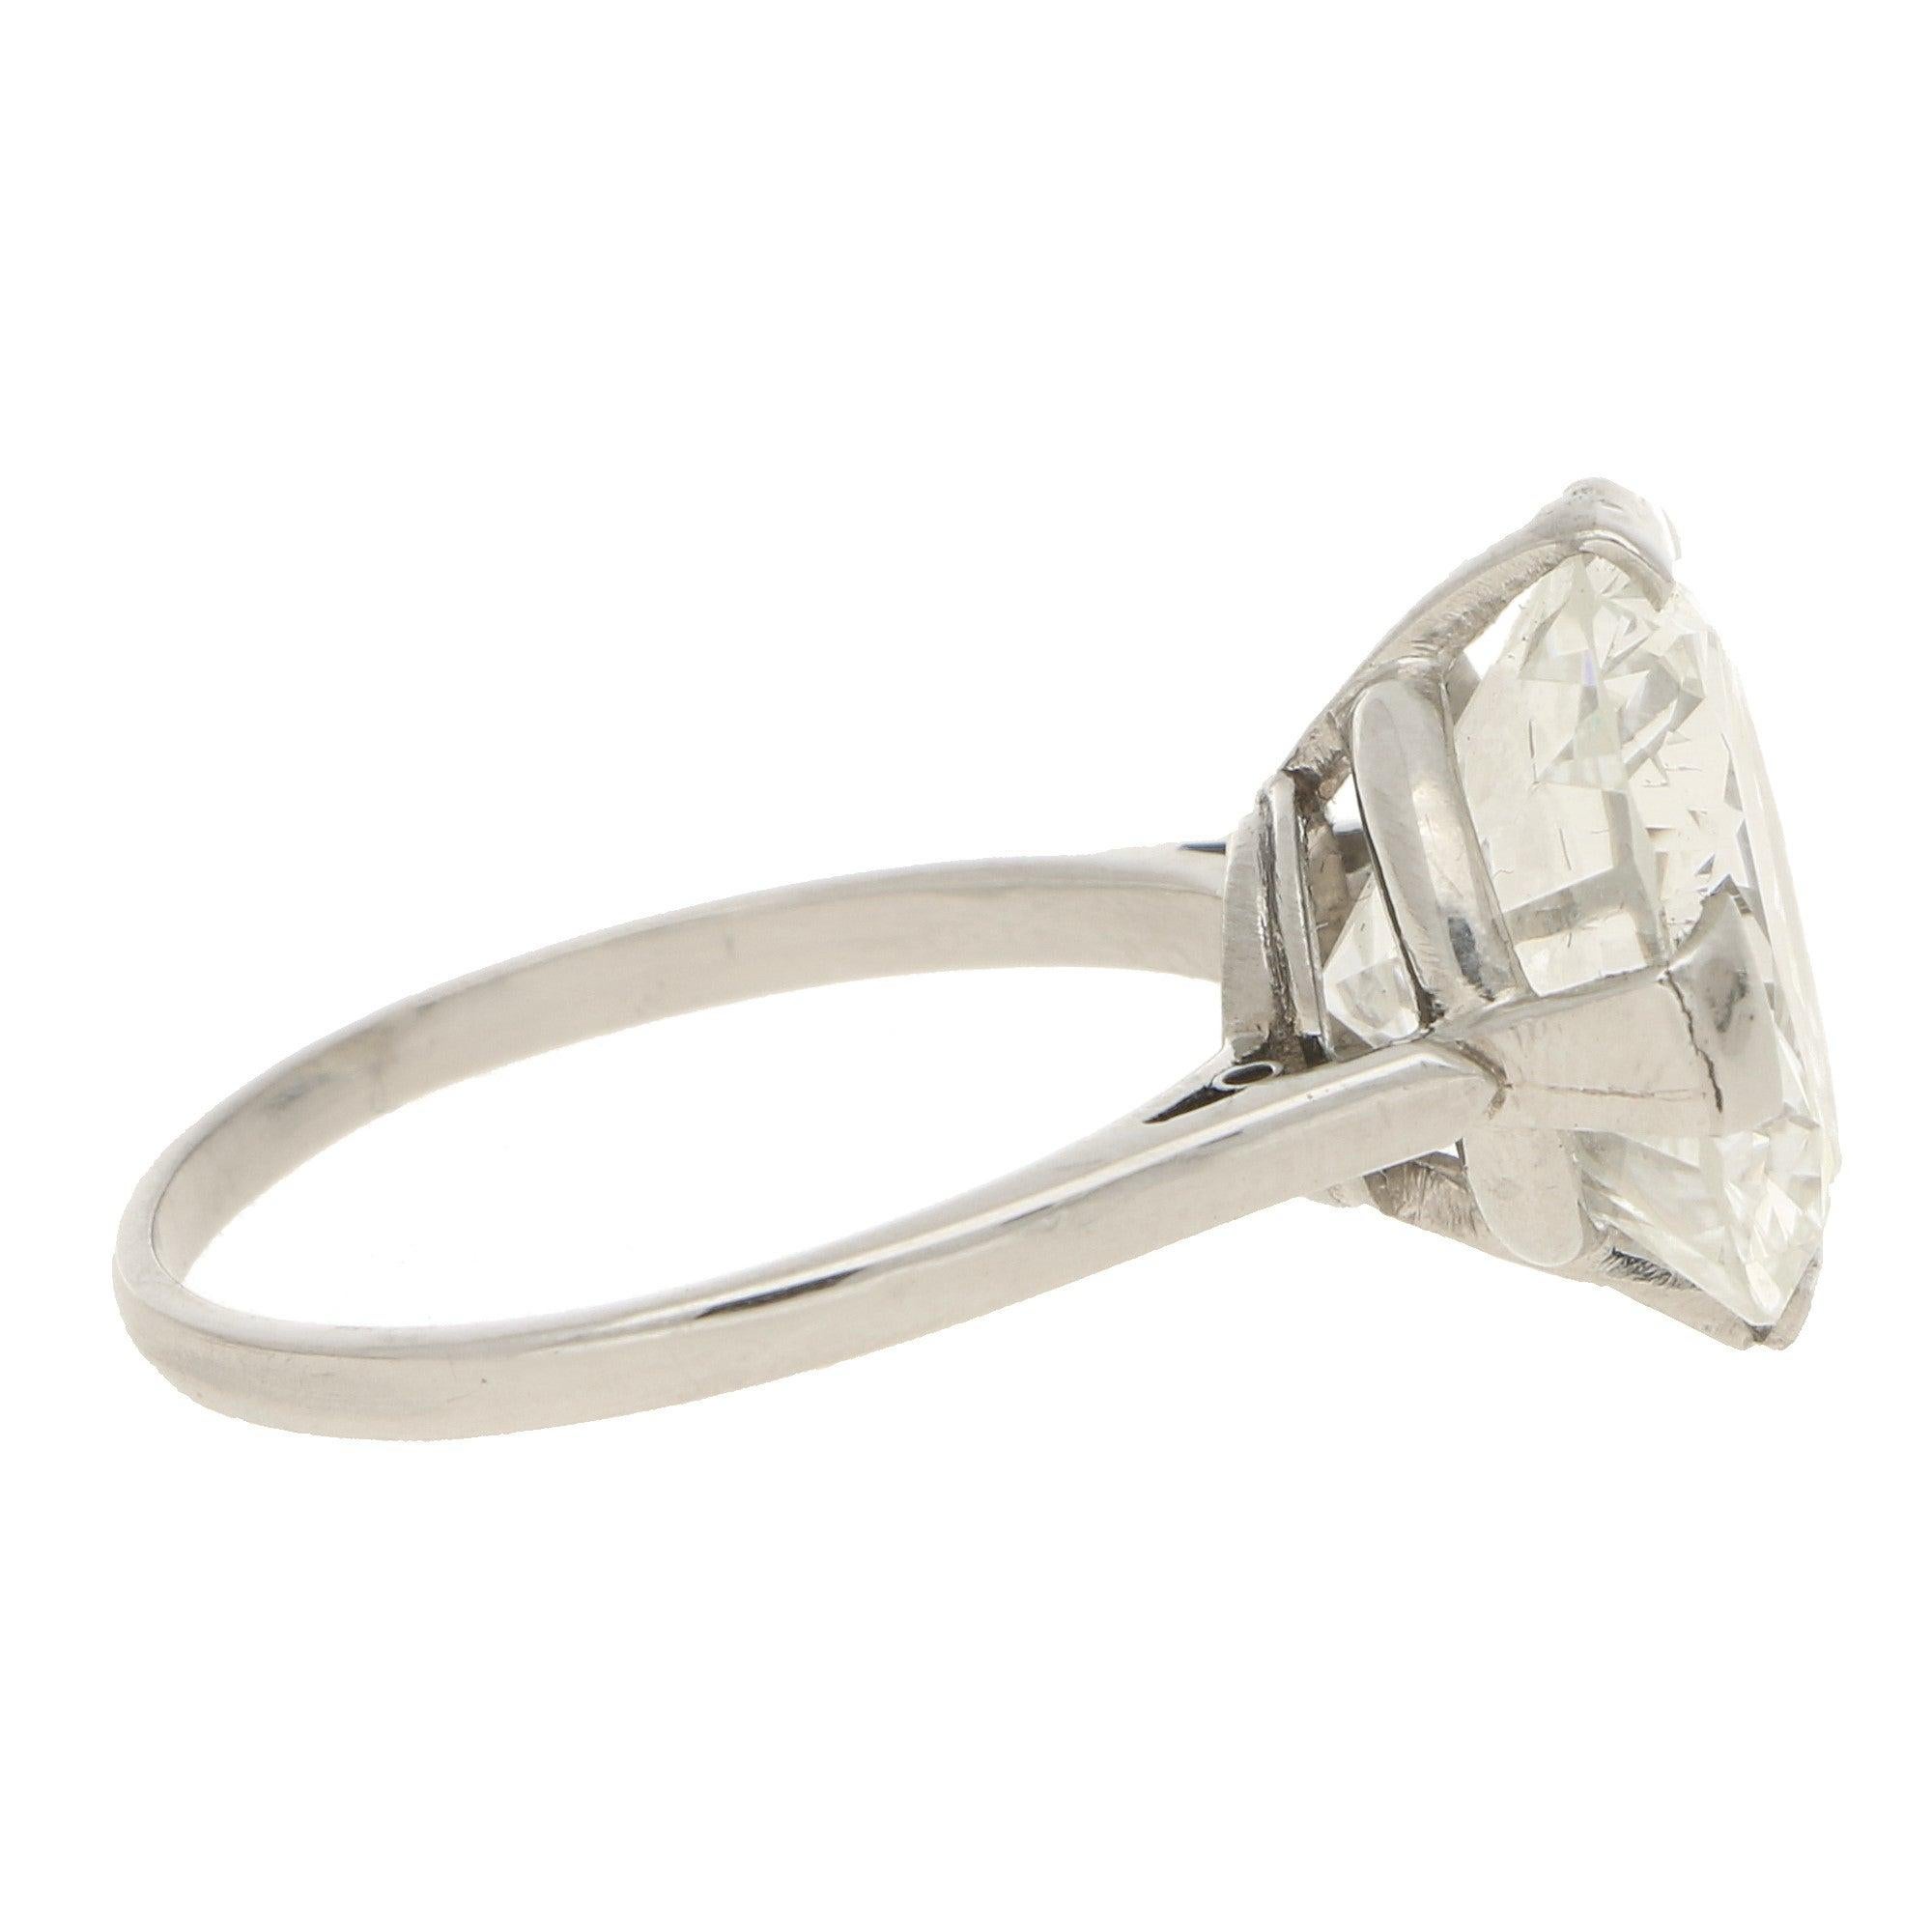 A truly remarkable Art Deco diamond single solitaire ring set in platinum.

The ring is solely set with a magnificent 7.49 carat round brilliant cut diamond. This is four claw-set in a white gold open gallery setting which flows nicely to slightly